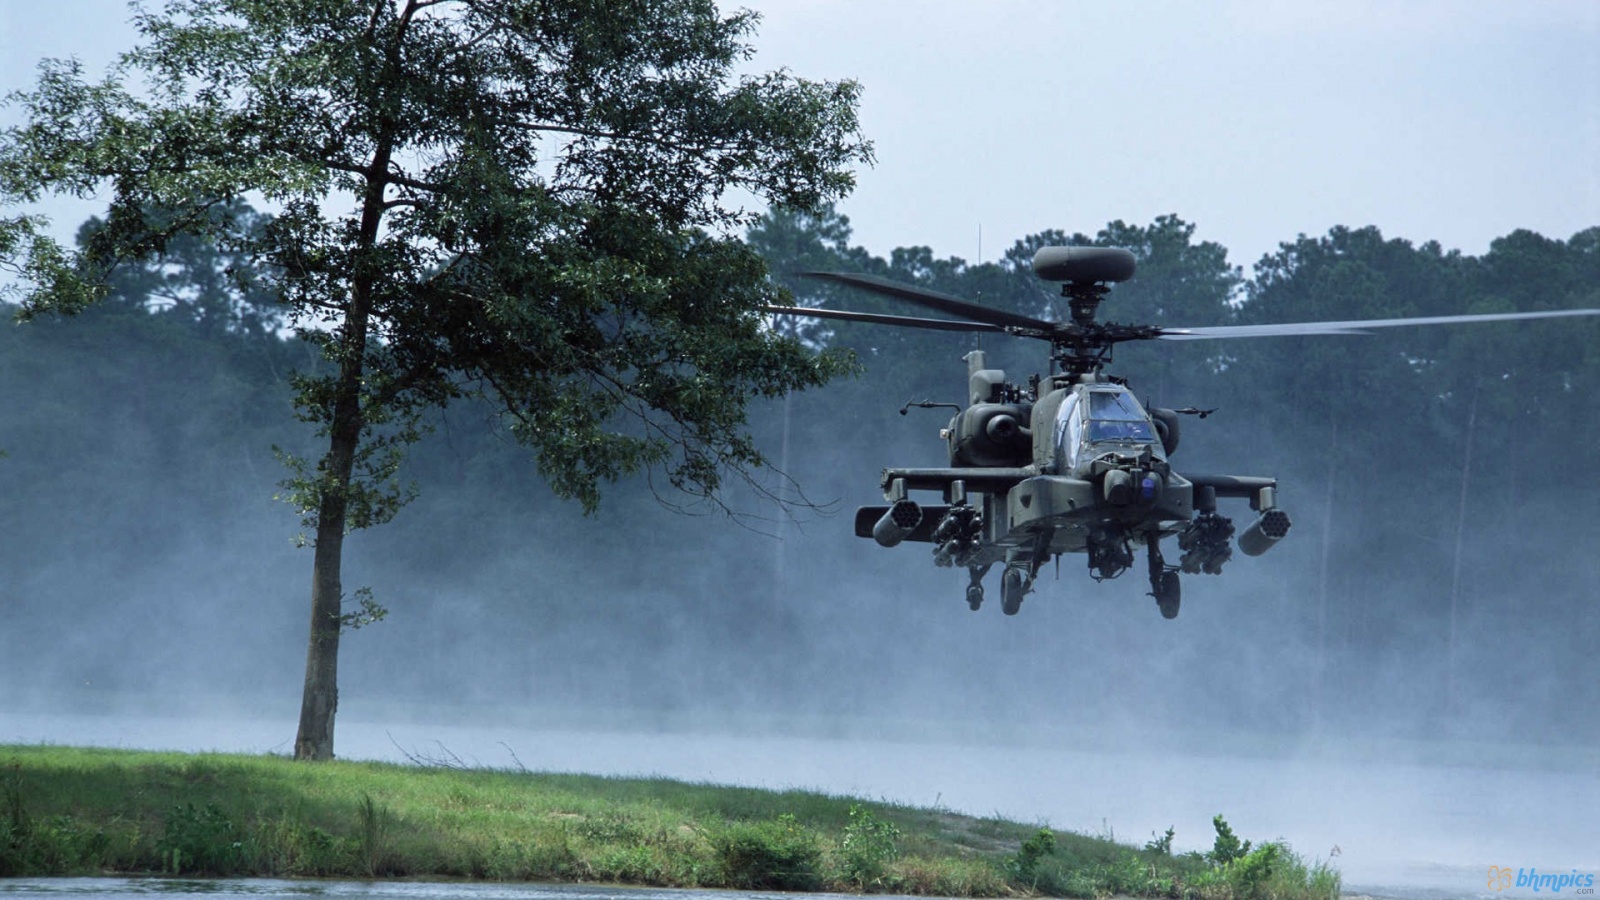 Ah Apache Helicopter HD Wallpaper Res In High Quality